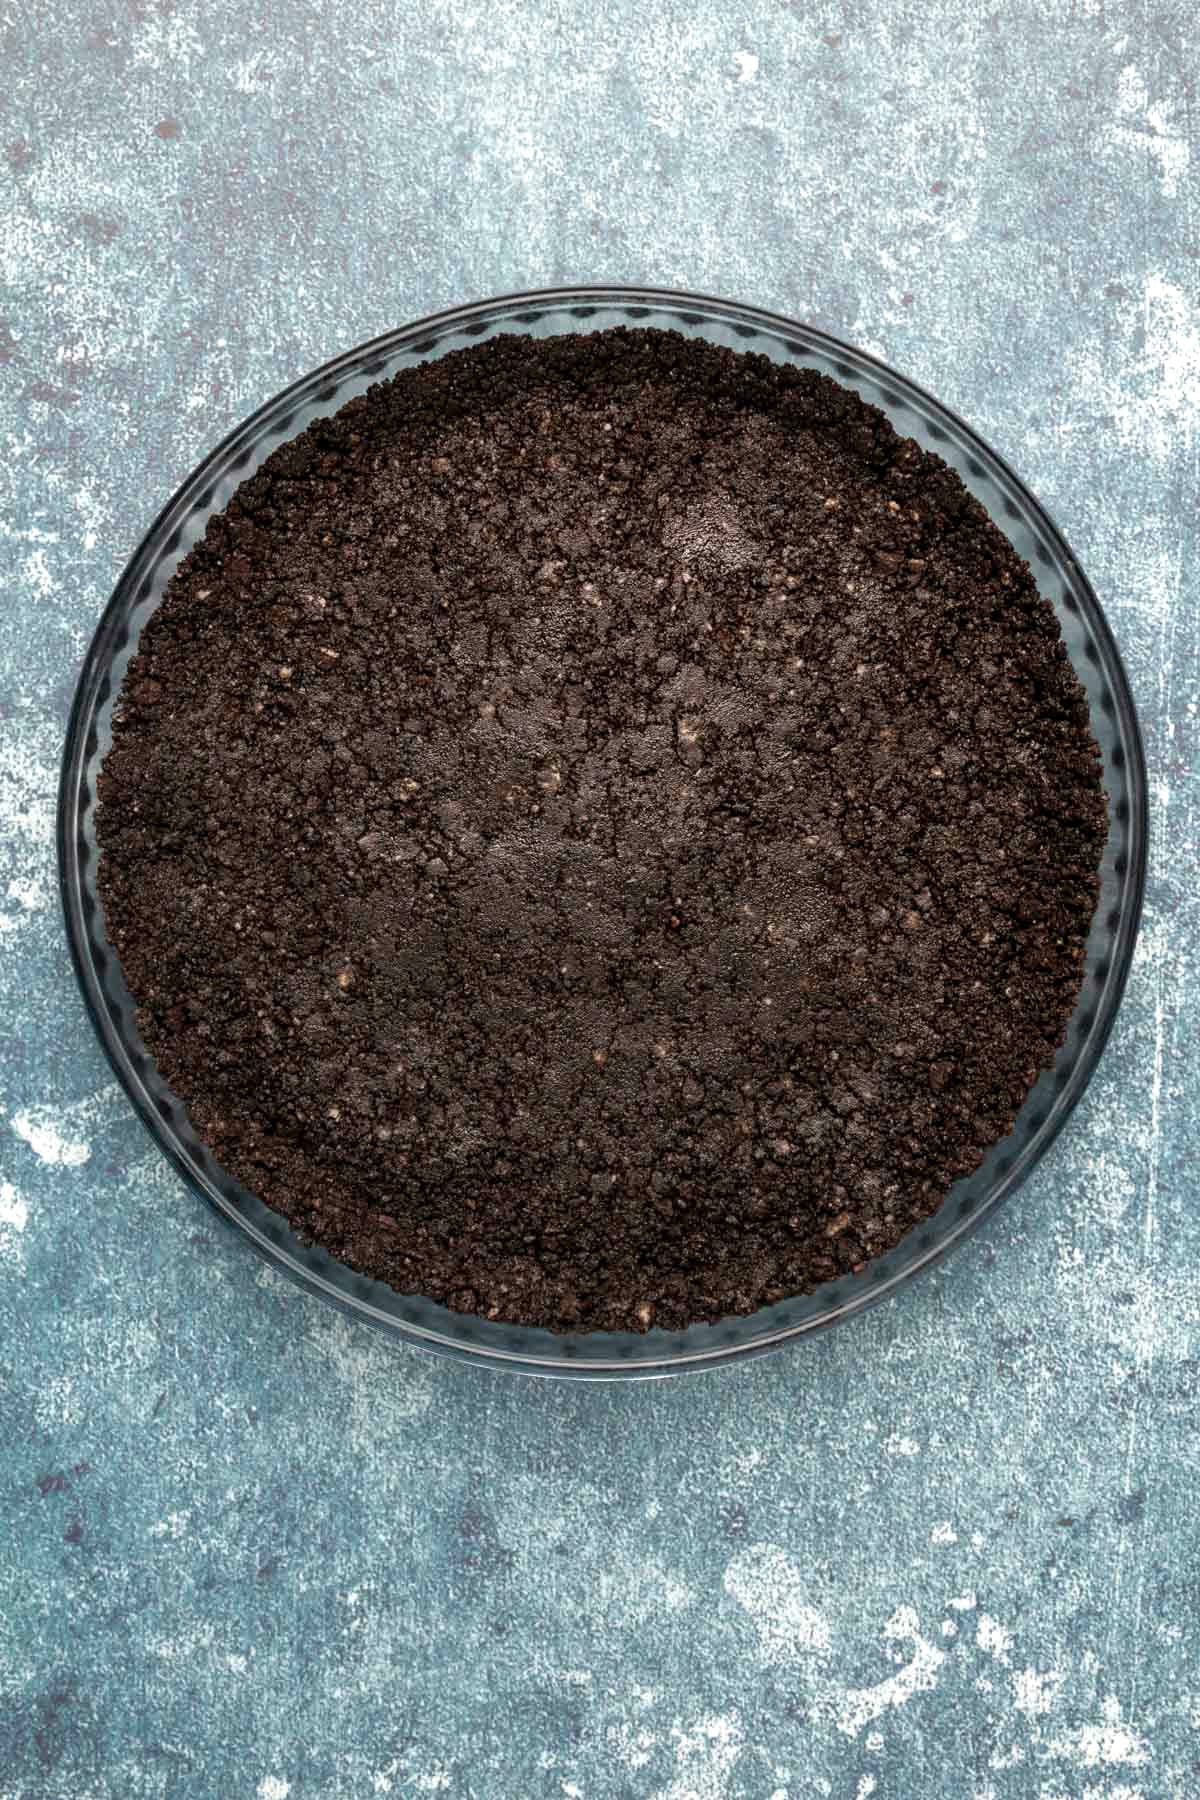 Oreo cookie crust pressed down into a glass pie dish.